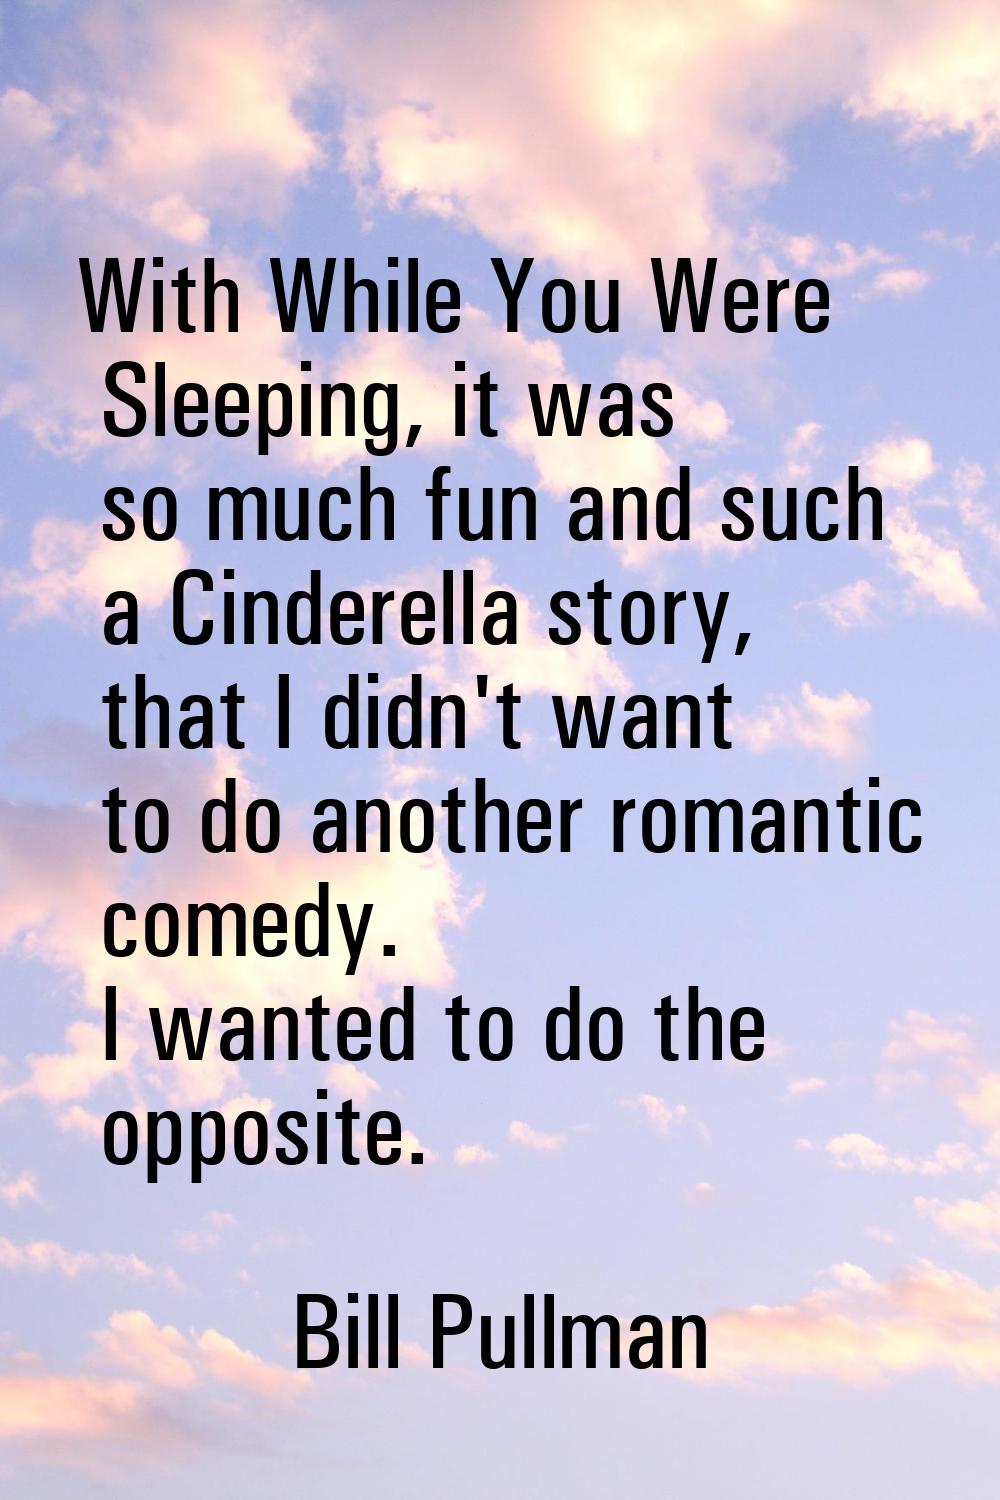 With While You Were Sleeping, it was so much fun and such a Cinderella story, that I didn't want to